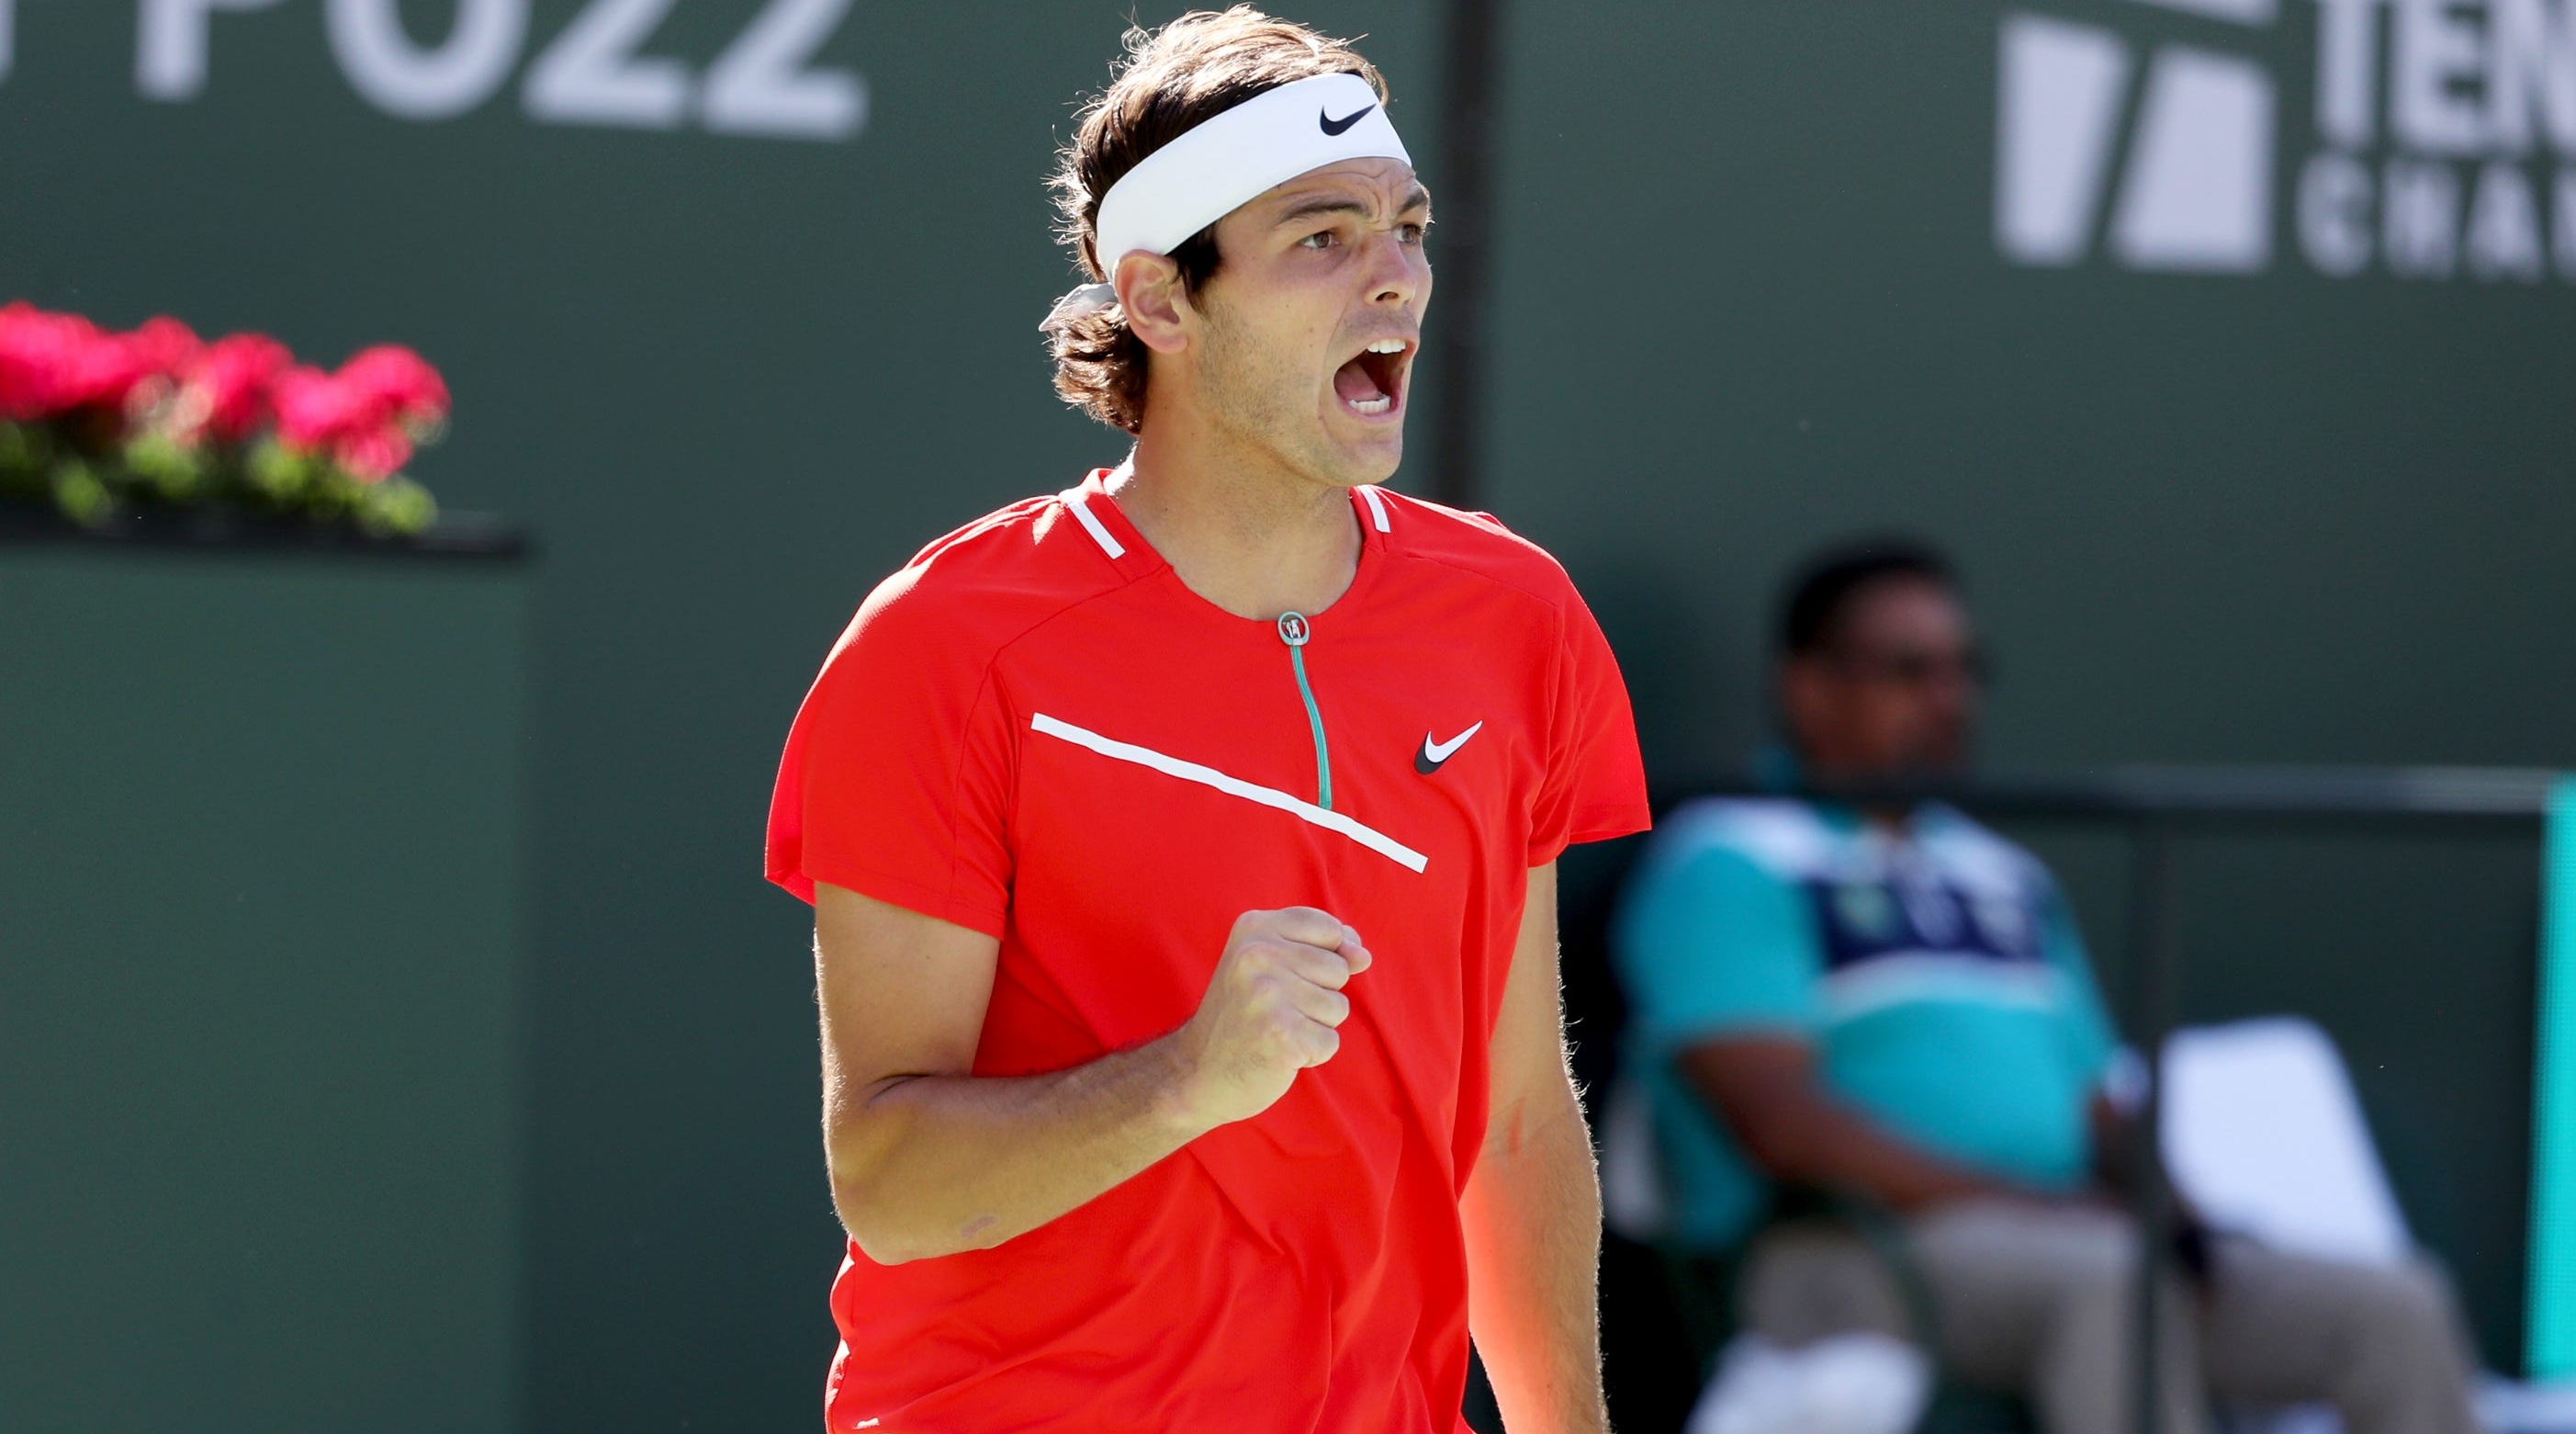 Rafael Nadals 20-match win streak snapped by Taylor Fritz at Indian Wells 